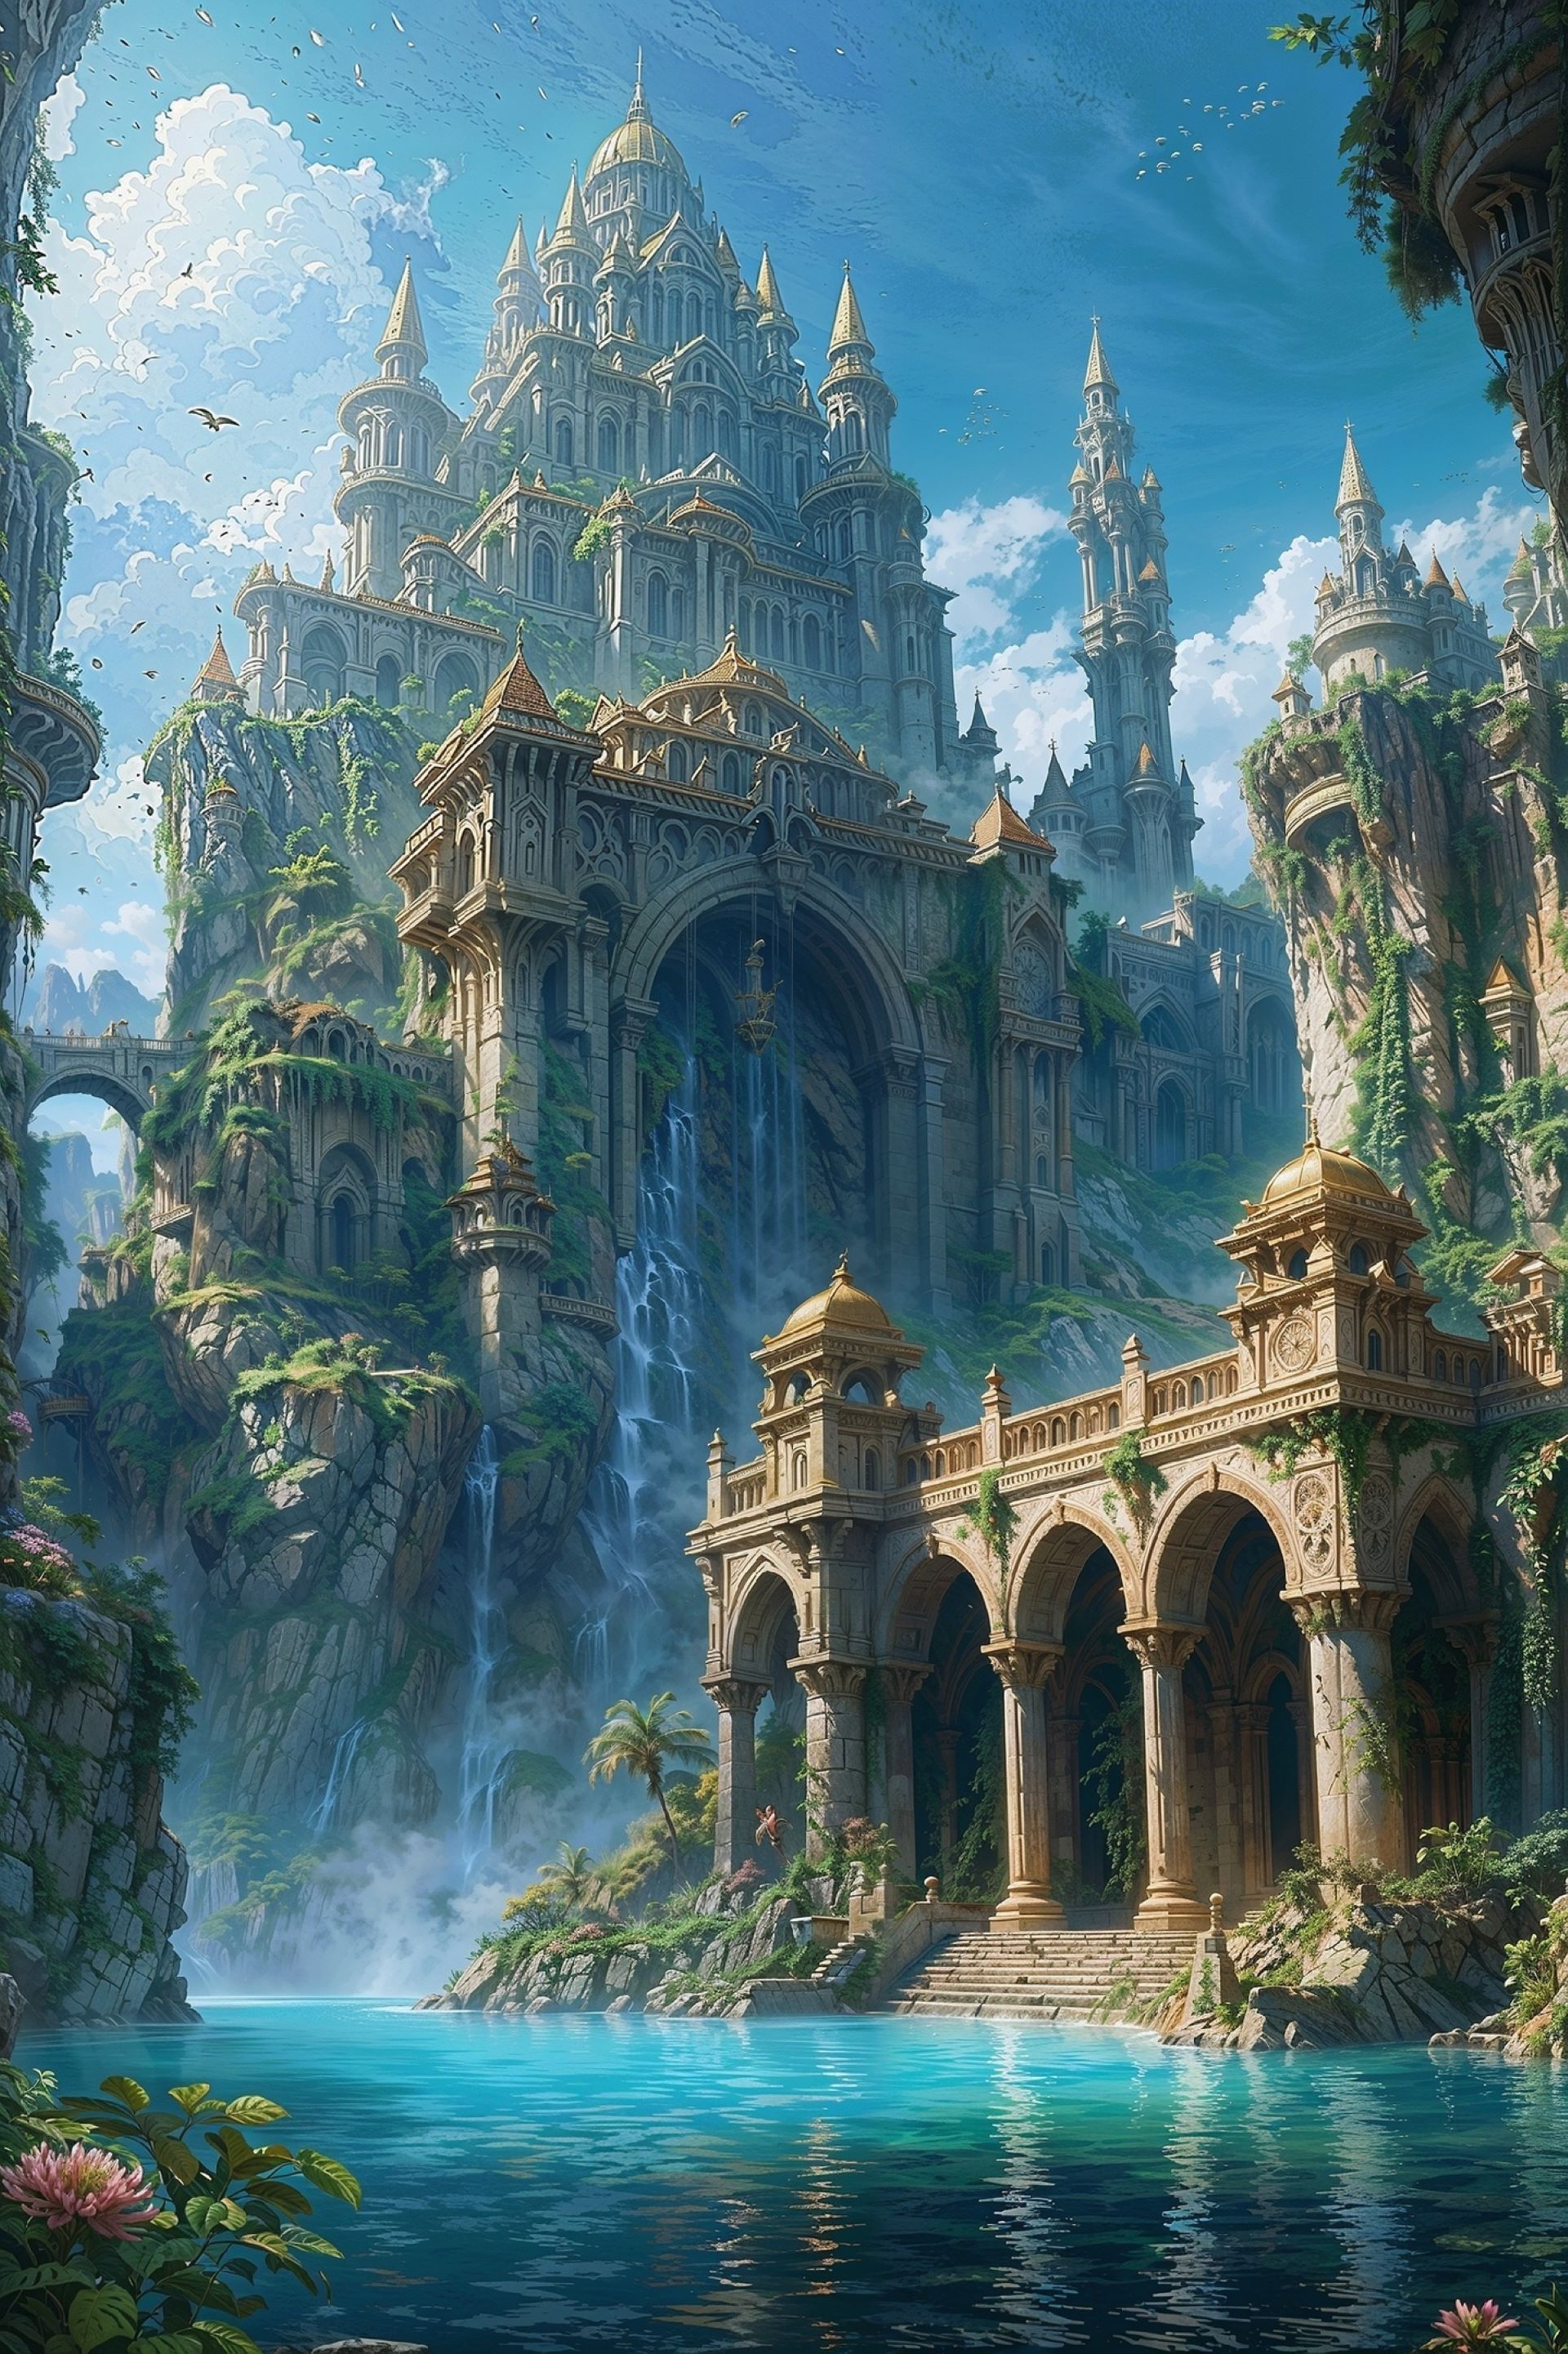 The ruins of a magnificent palace